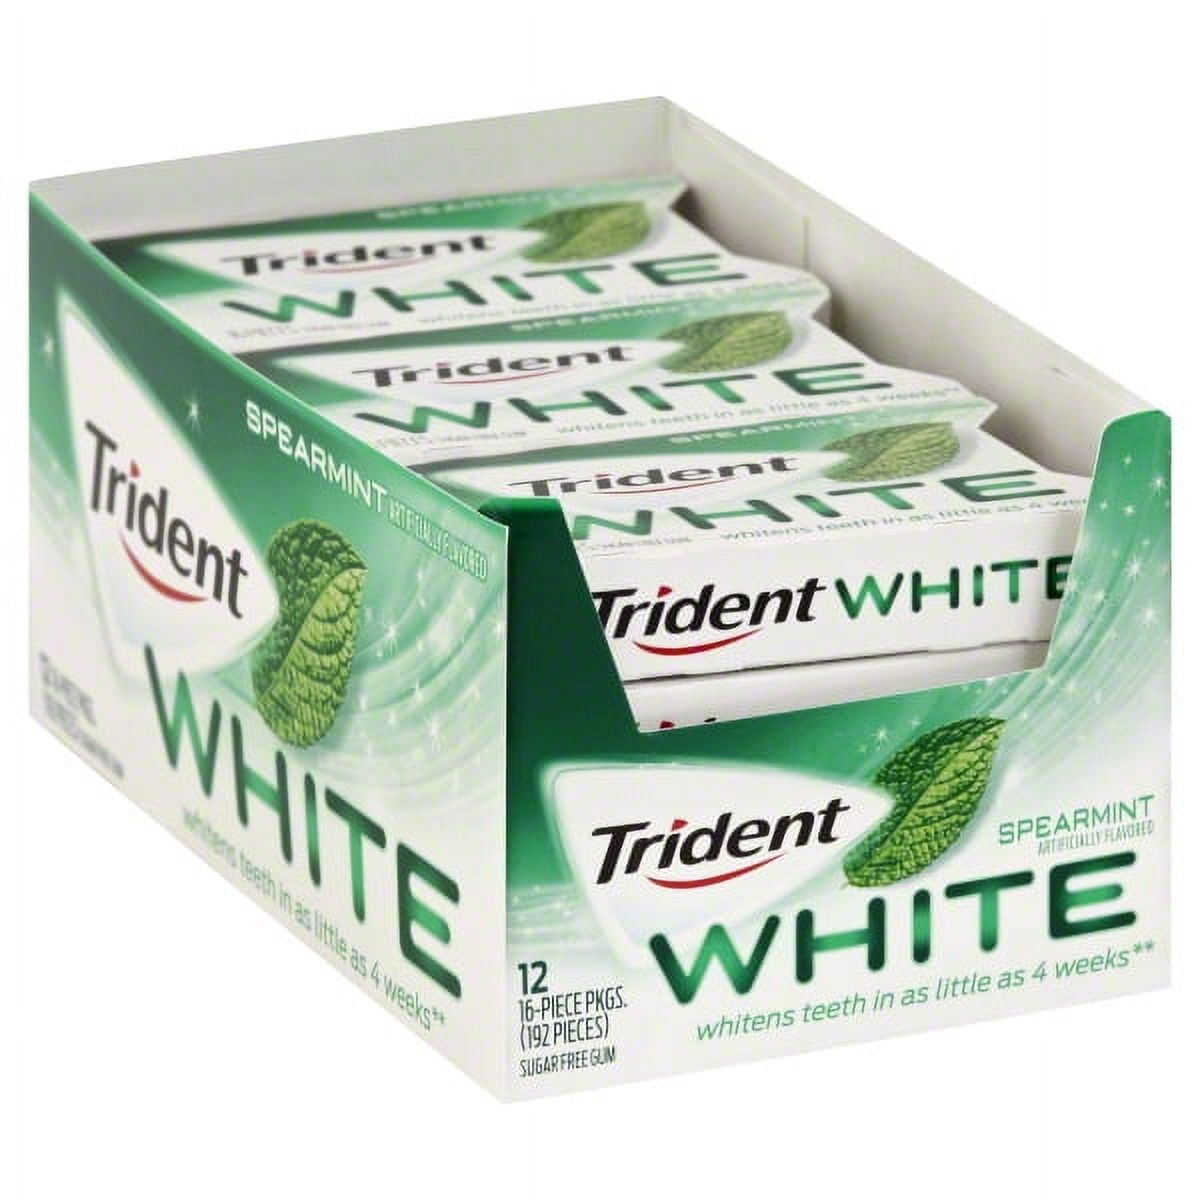 Trident White Dual Pack Sugar Free Gum Spearmint Artificially Flavored - 12 Pack - image 1 of 3